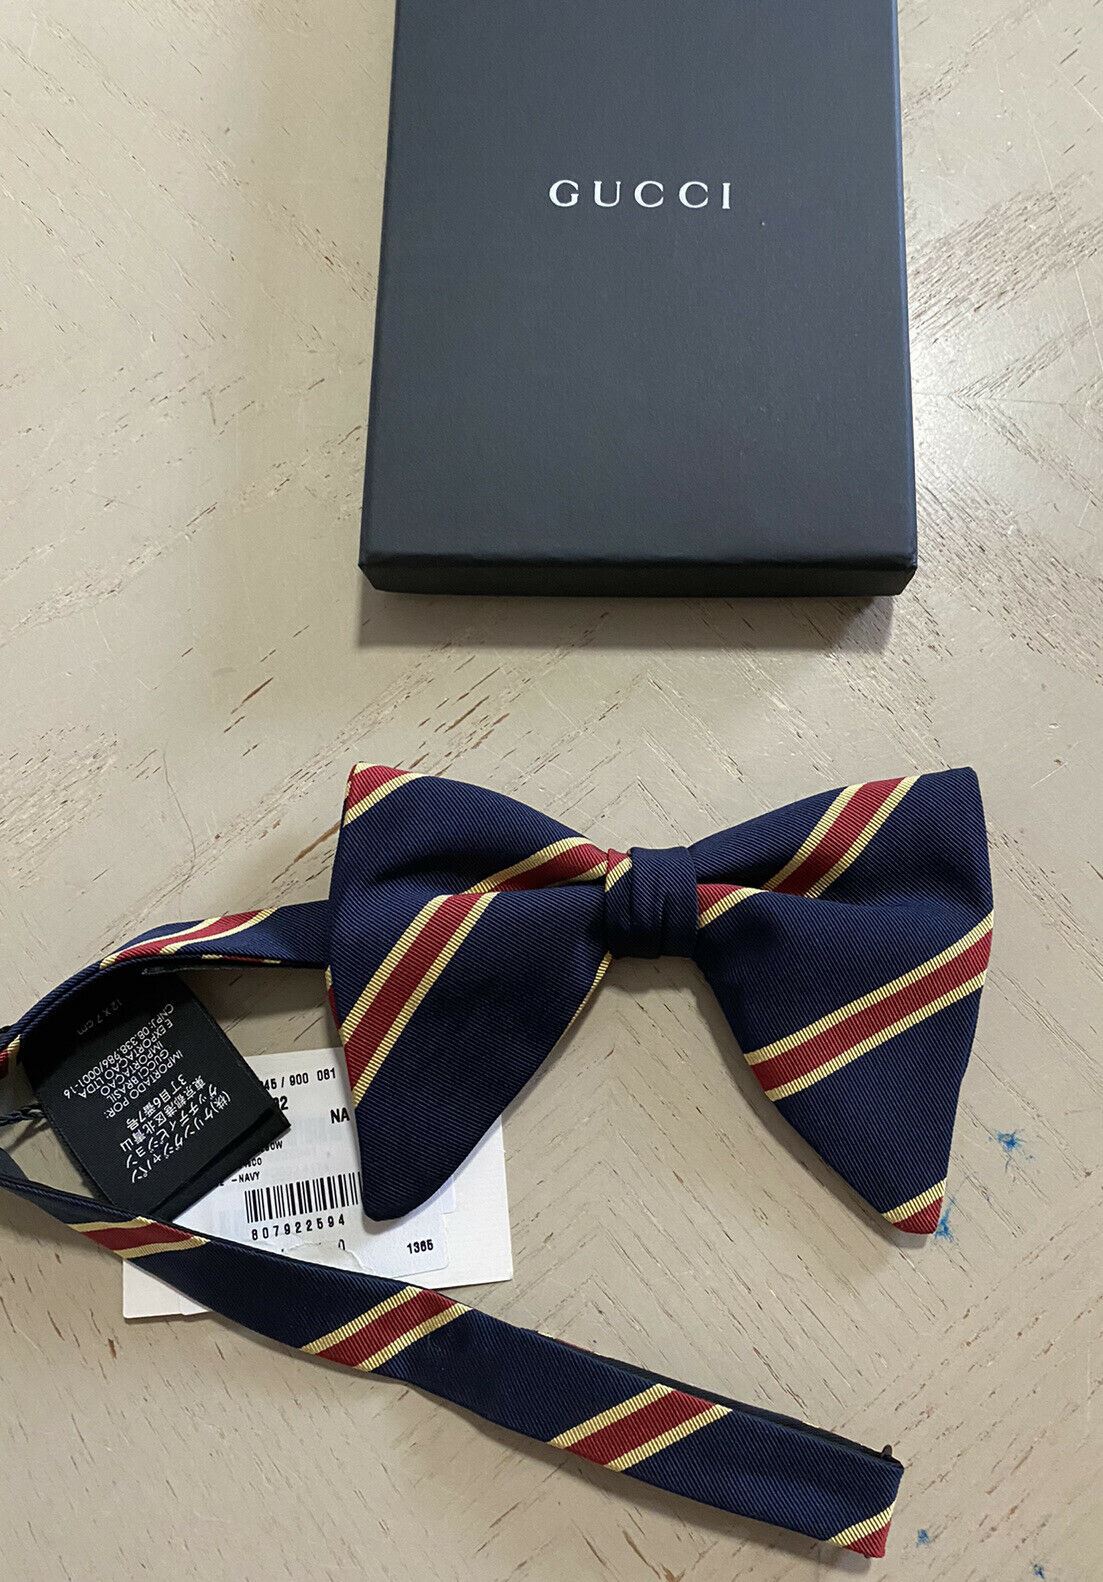 New  Gucci  Bow Tie Blue/Red Made in Italy